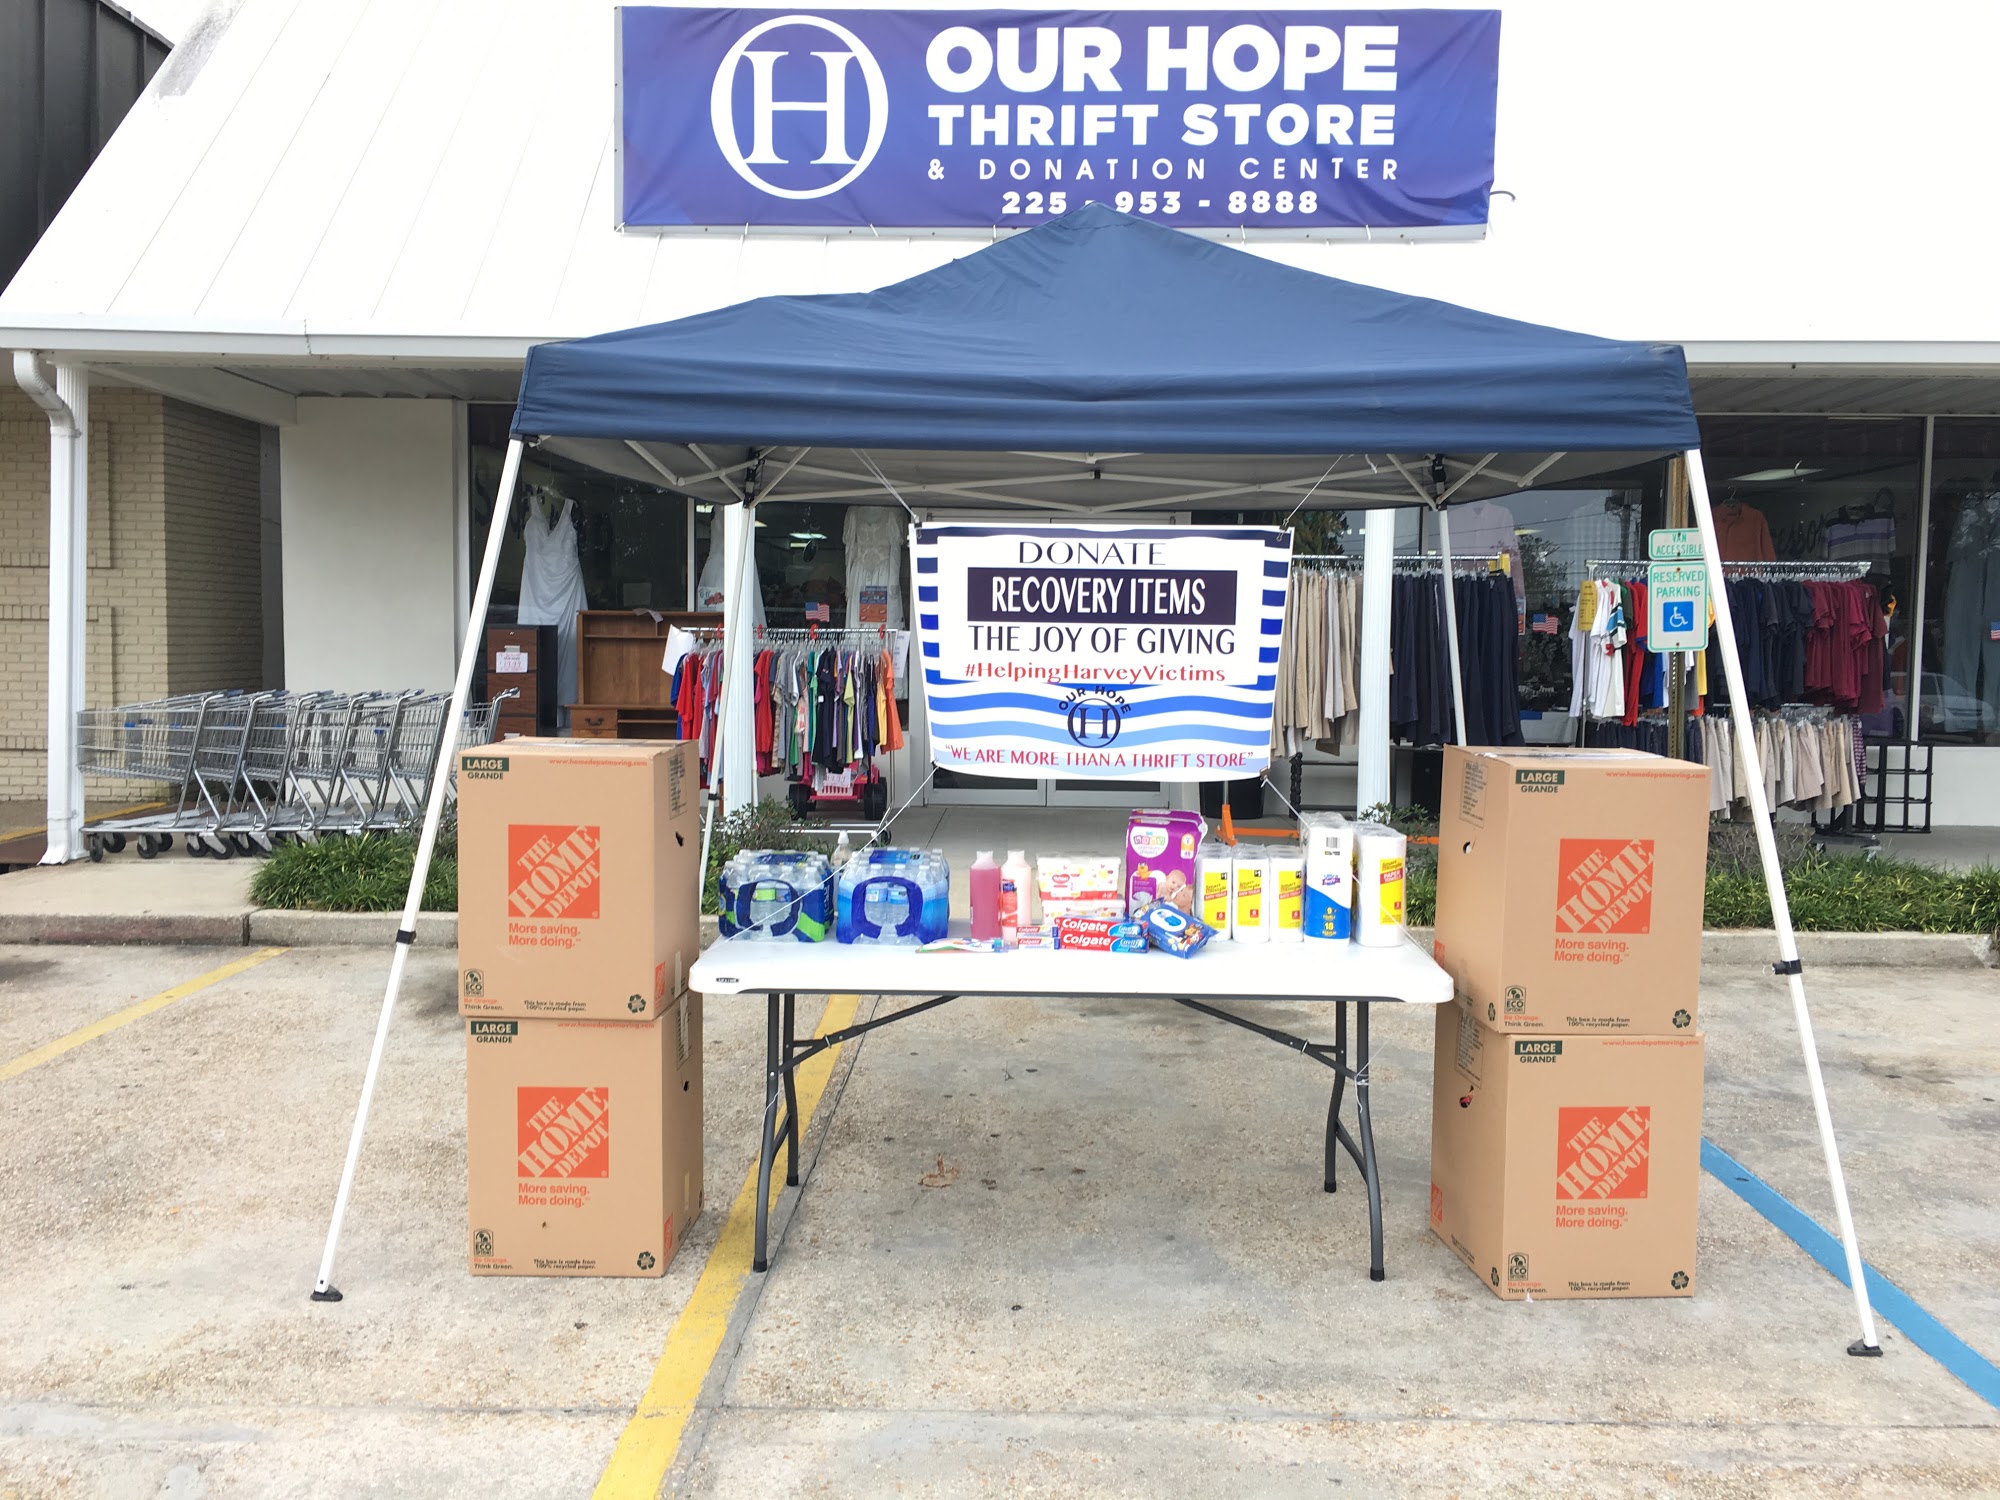 Our Hope Thrift & Donation Center